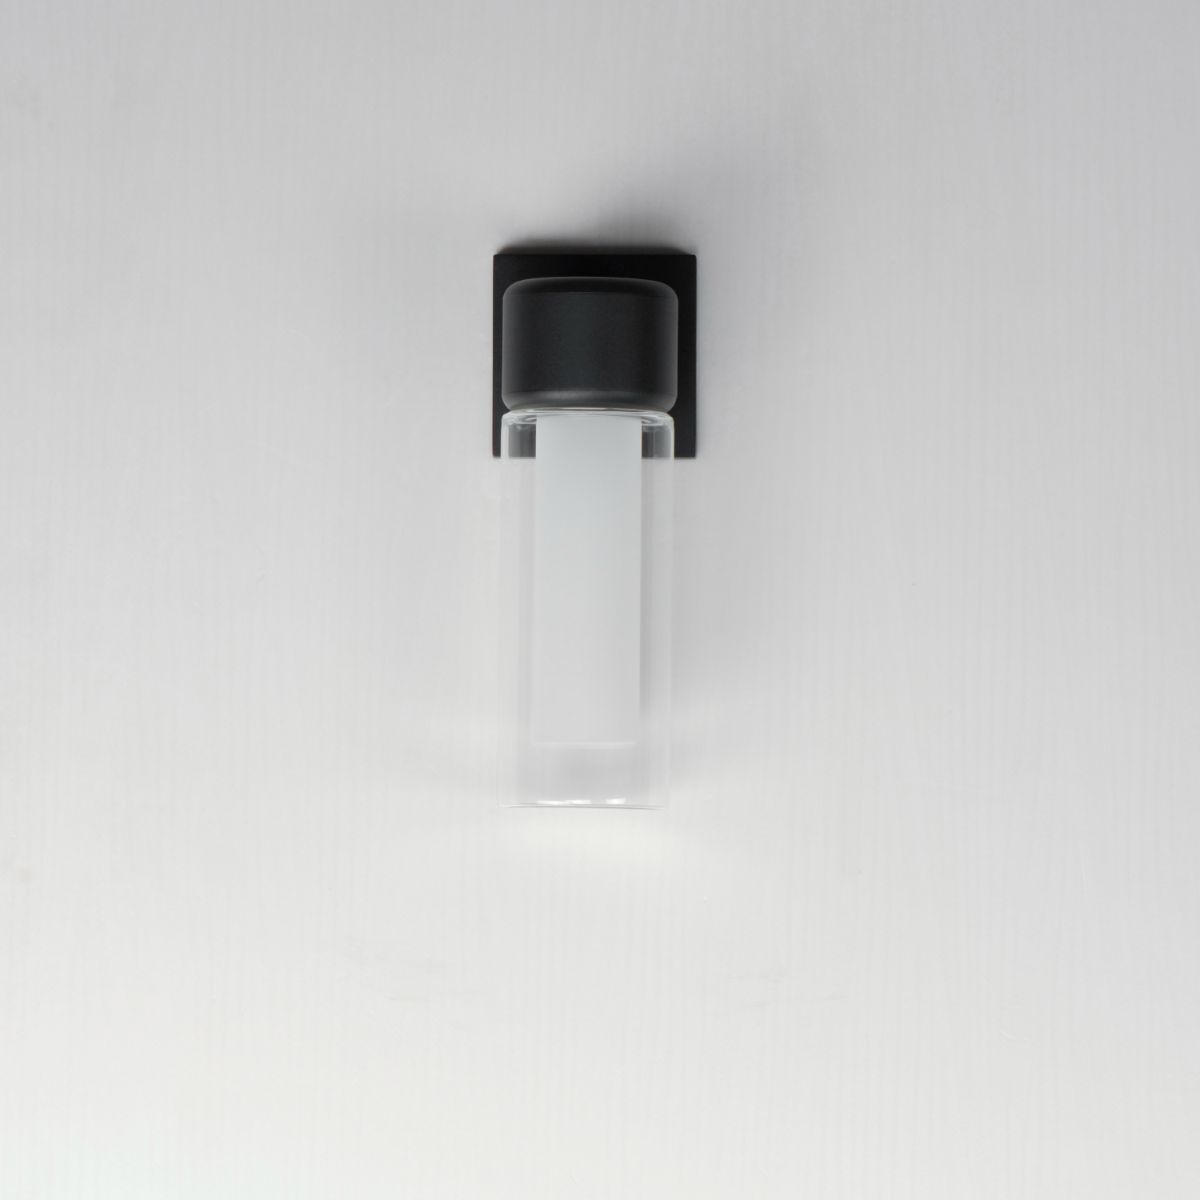 Dram 12 in. LED Outdoor Wall Sconce Black Finish